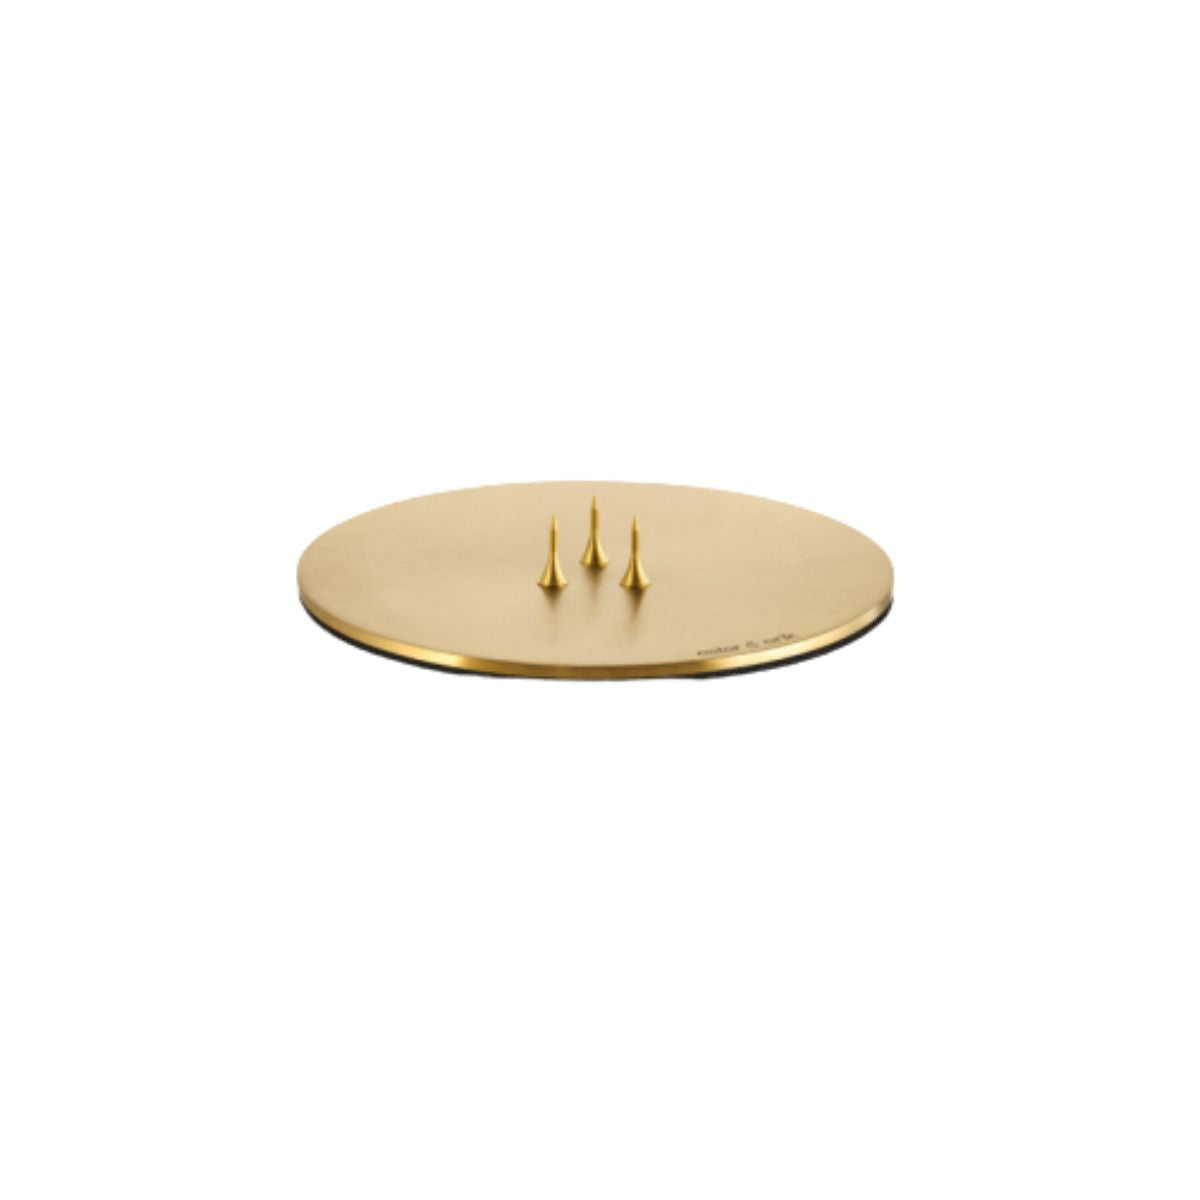 Small Candle Holder Plates-Bespoke Designs